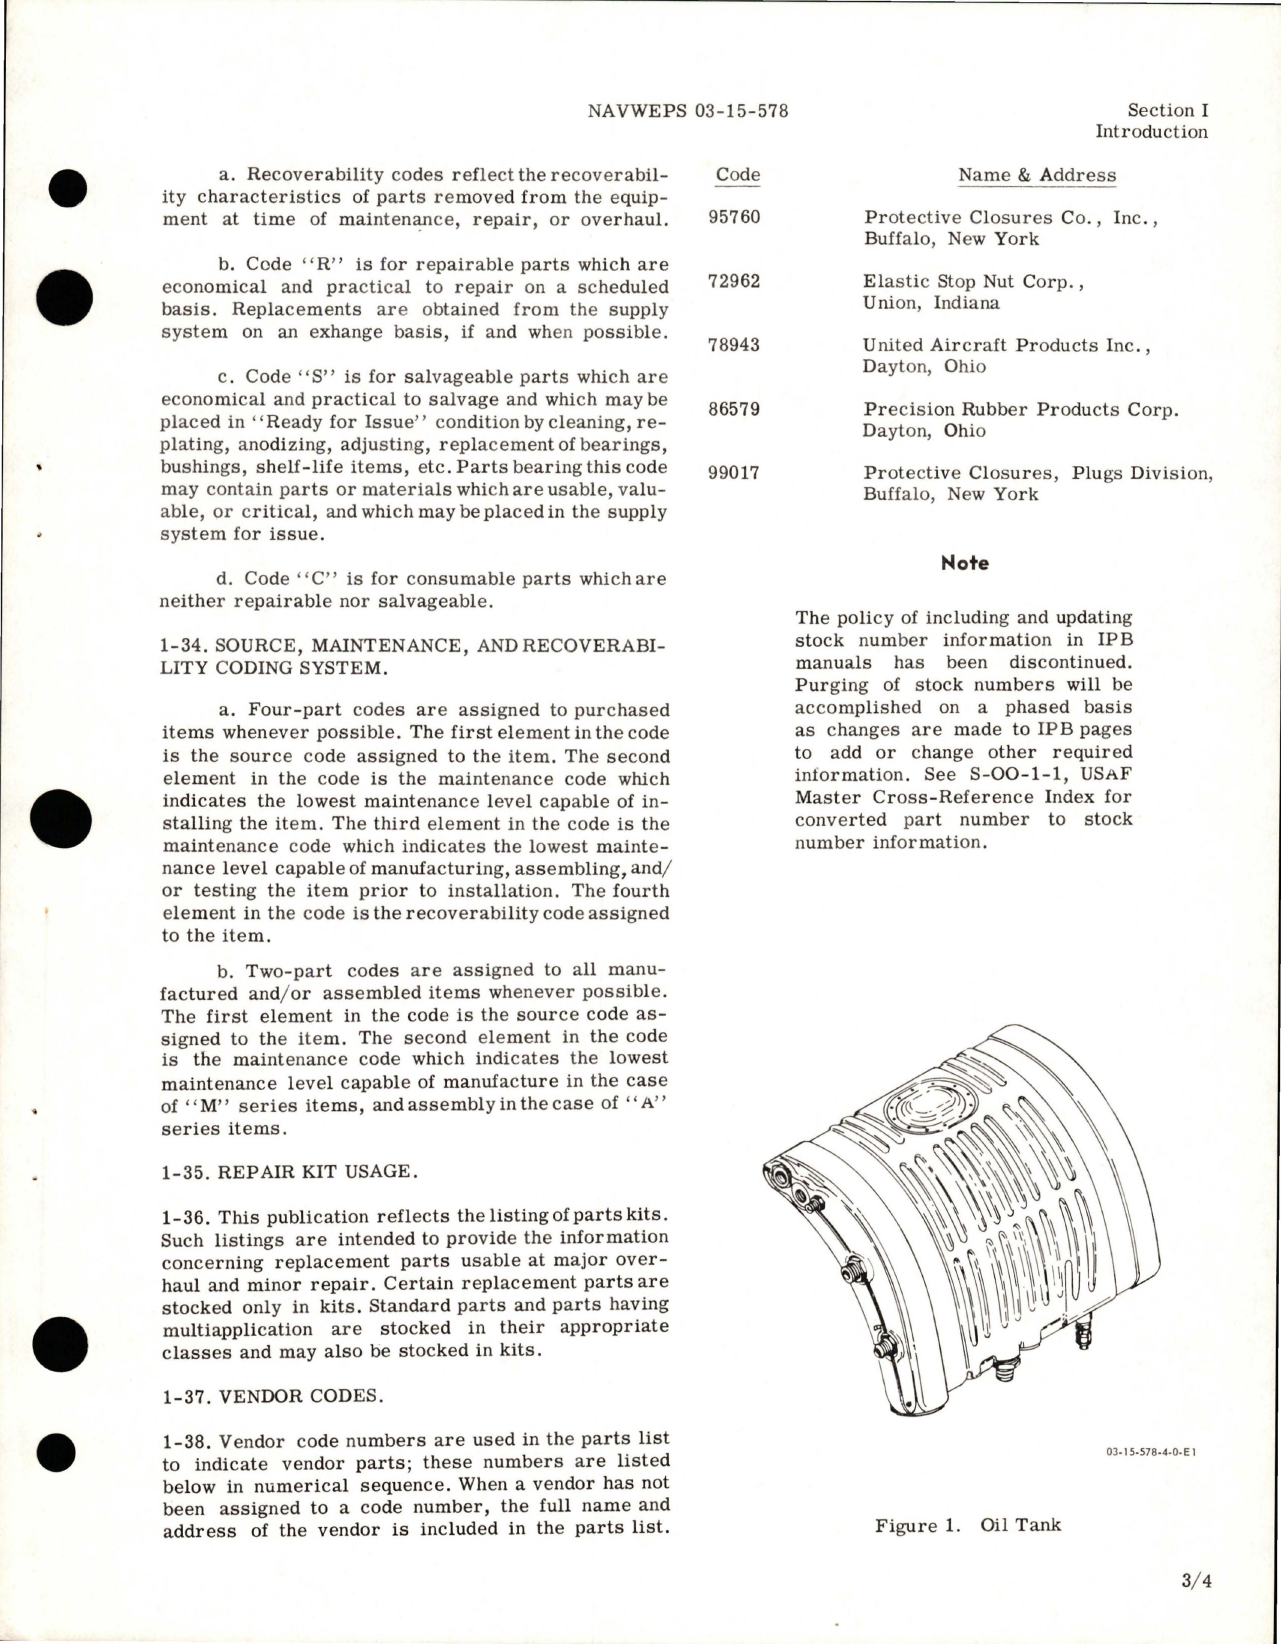 Sample page 7 from AirCorps Library document: Illustrated Parts Breakdown for Oil Tanks